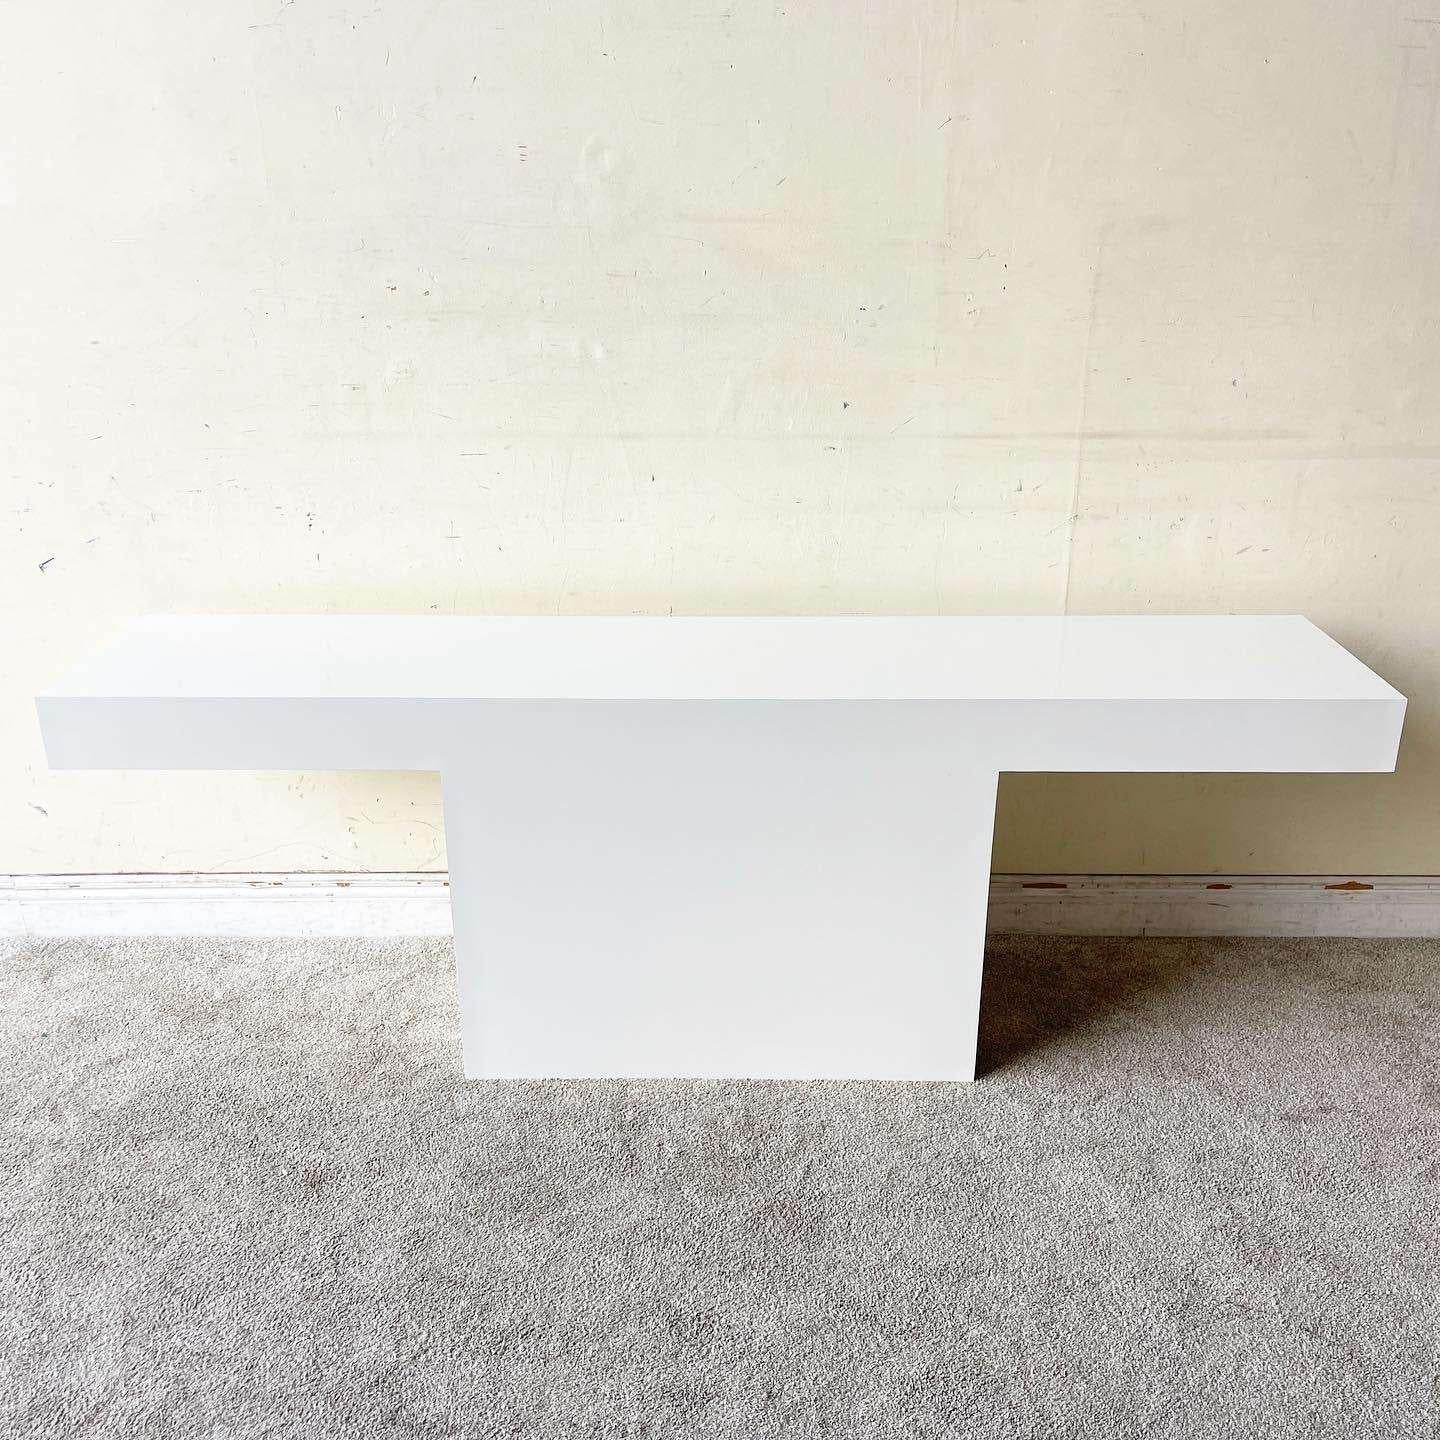 Amazing vintage postmodern T shaped console table. Features a white lacquer laminate throughout the surfaces.
